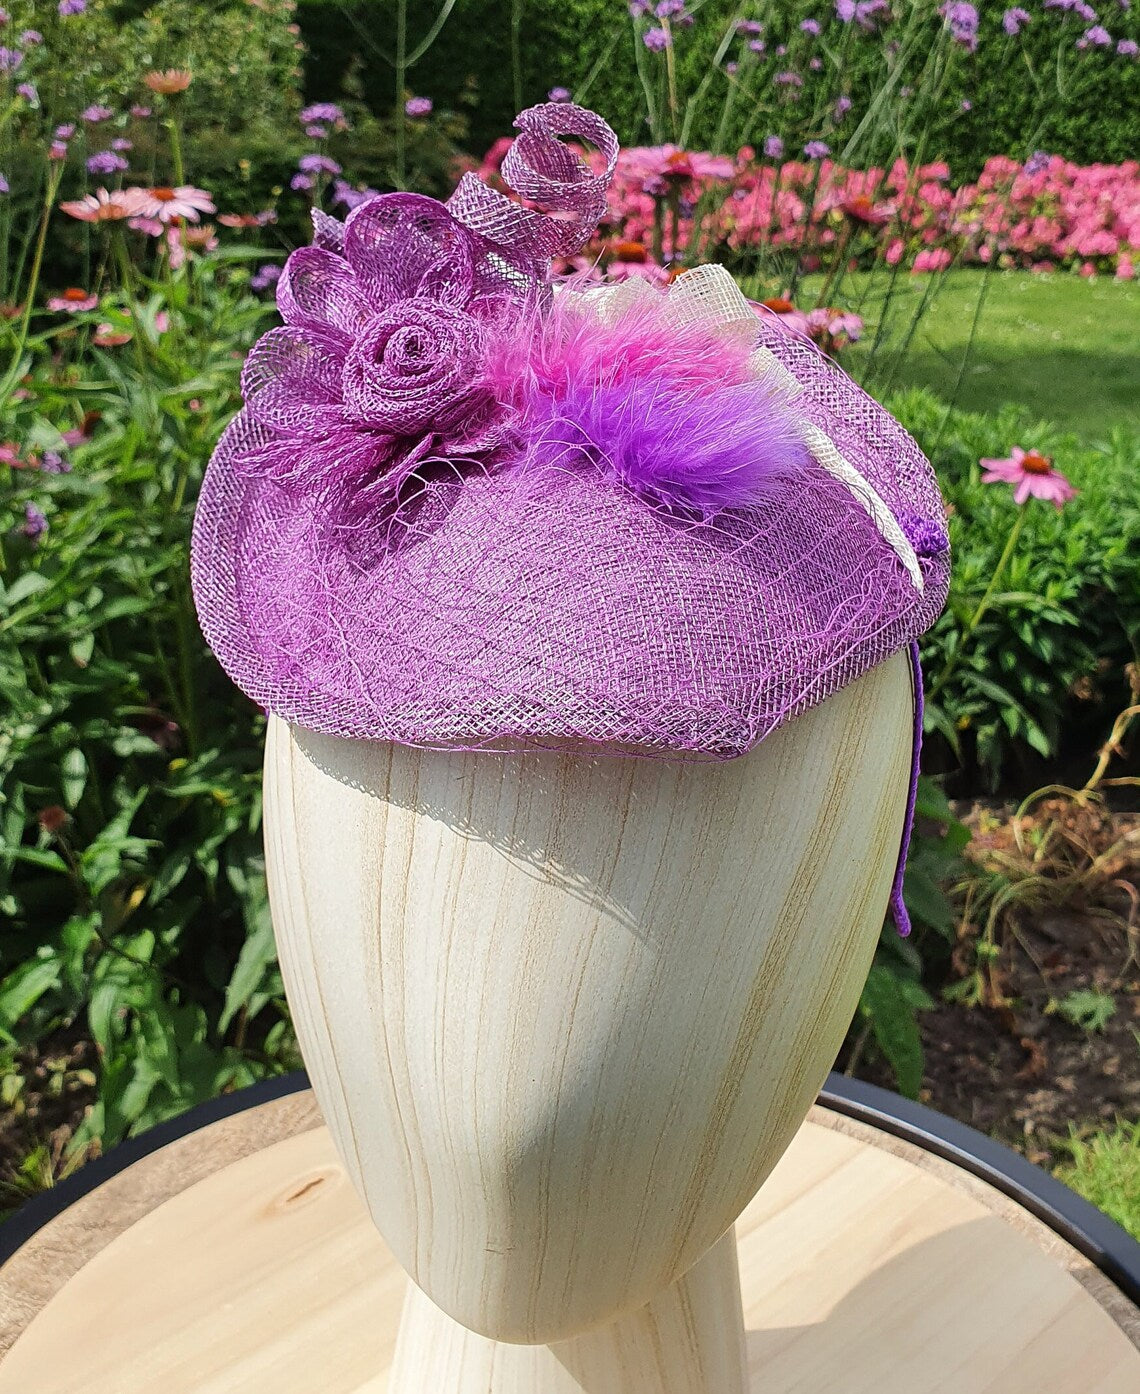 Fascinator handmade purple sinamay, with feathers and veil, metal headband, headdress - Perfect for festive occasions